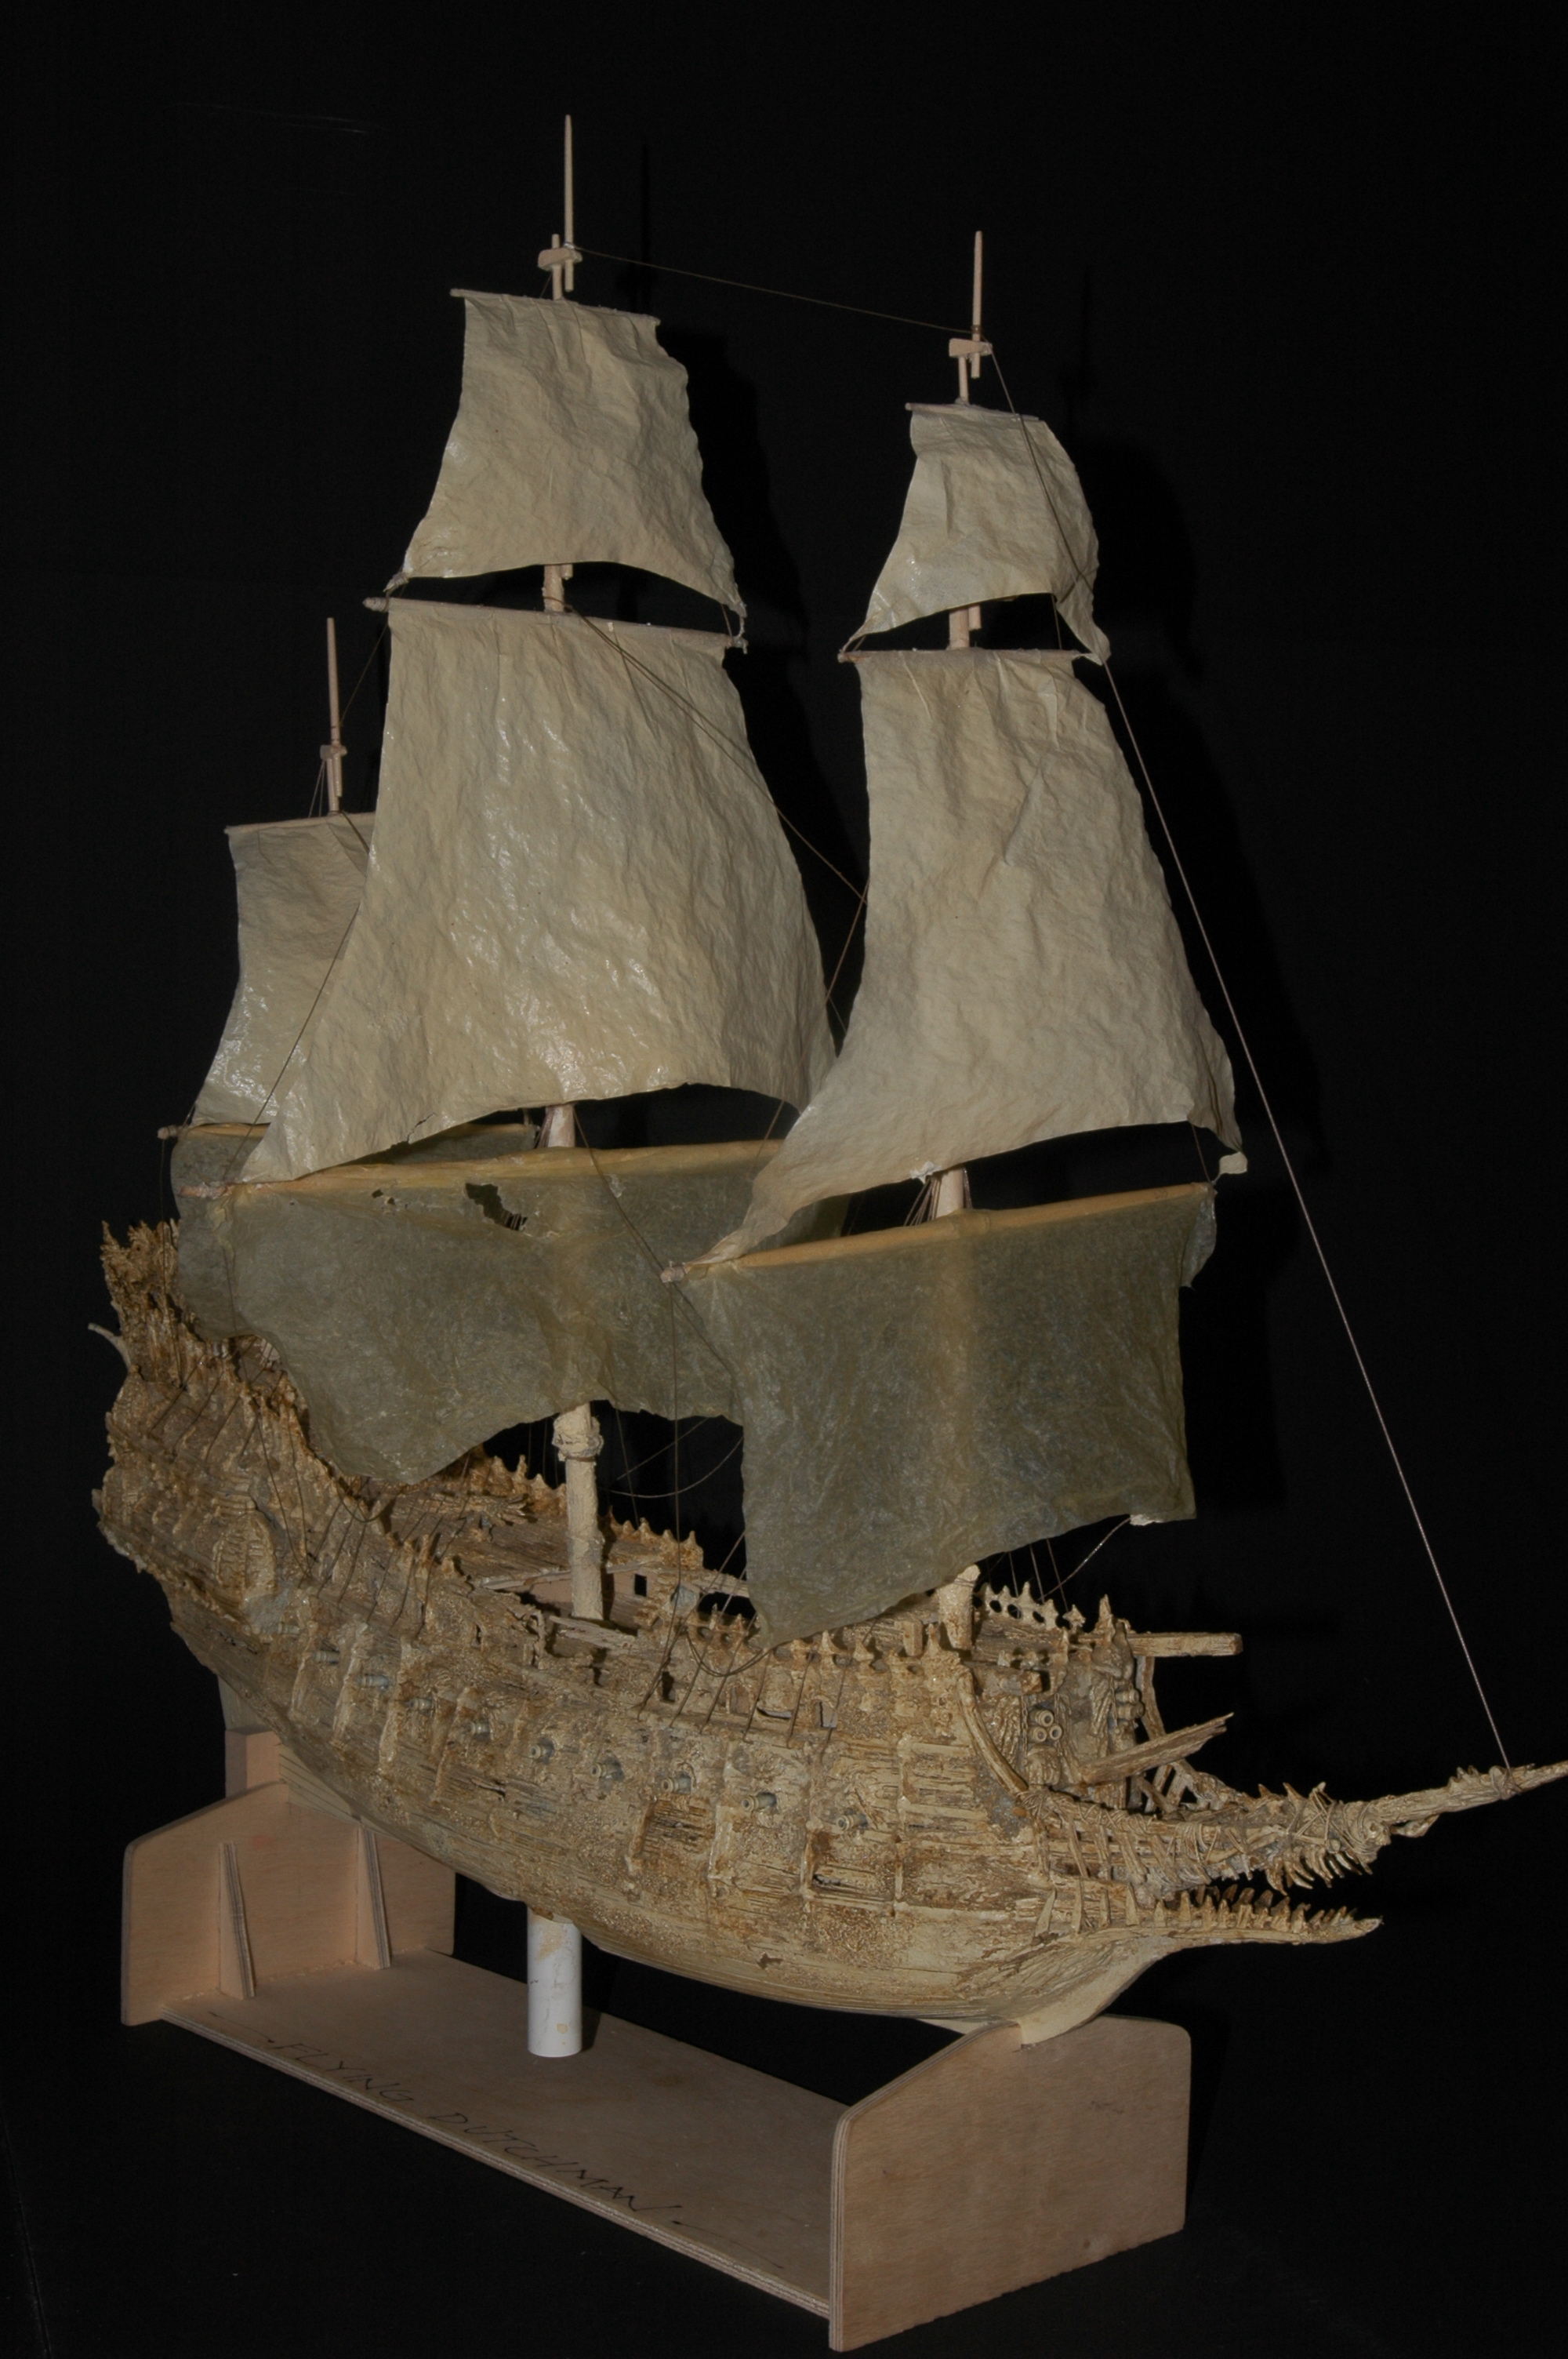 concept model of the Flying Dutchman for 